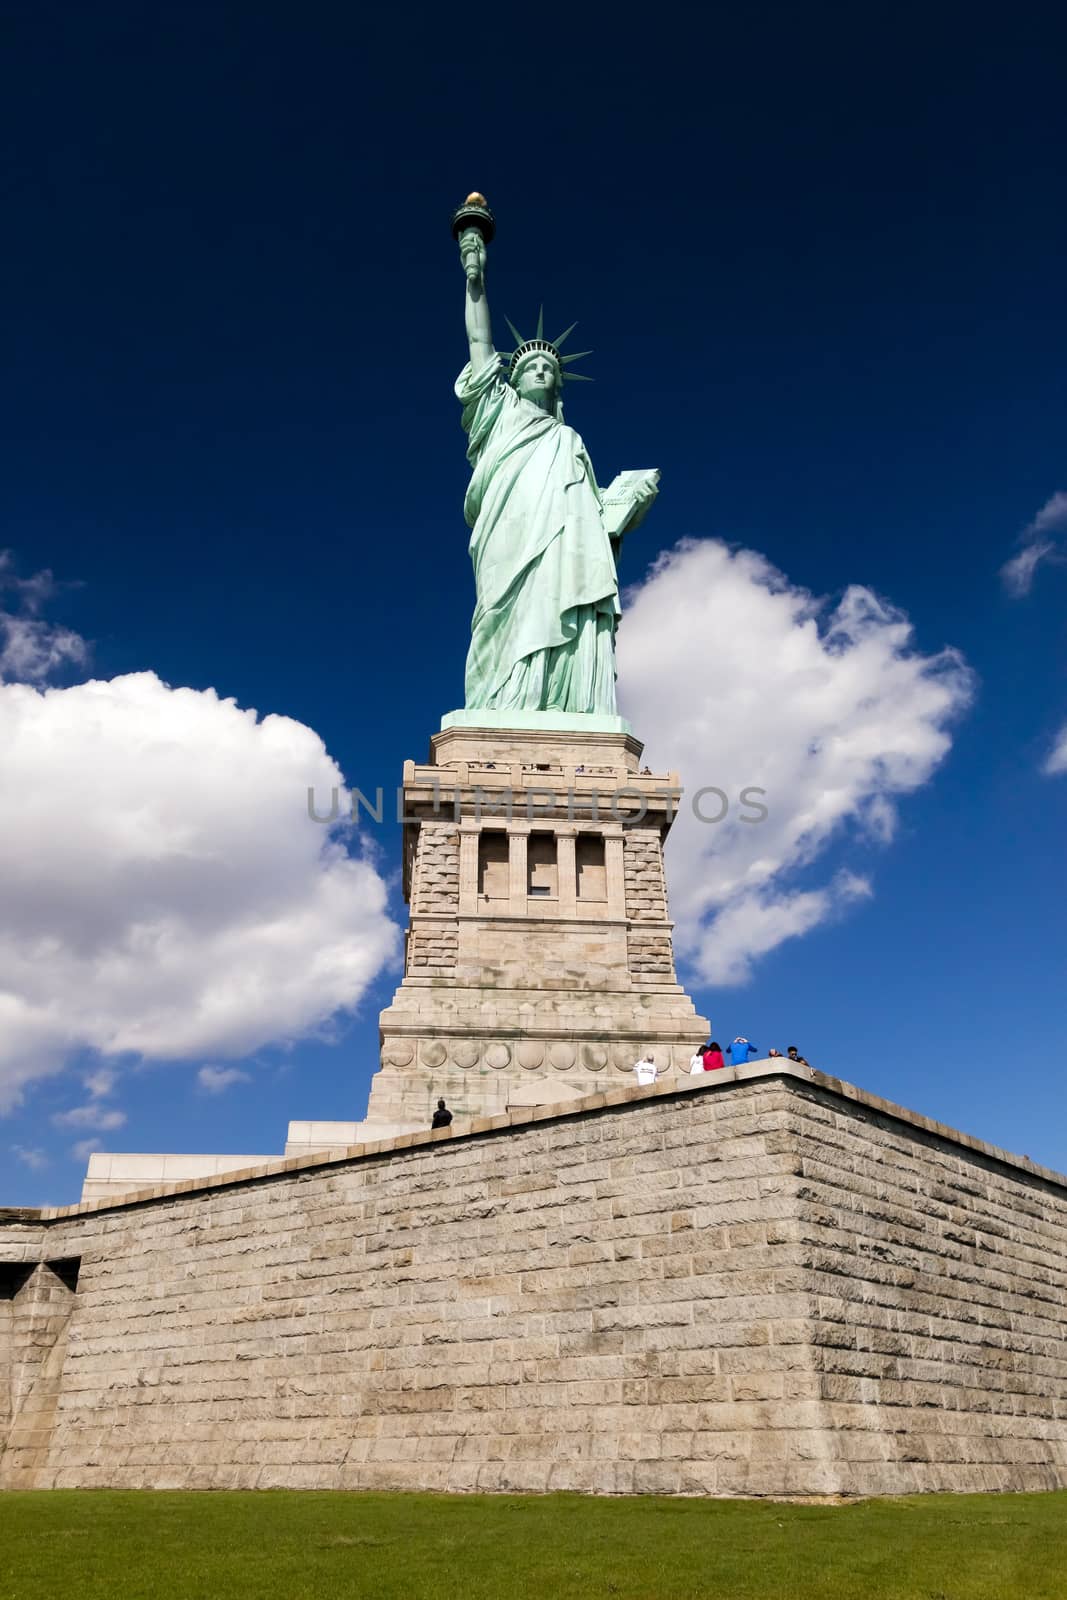 USA, New York, October 8, 2014: Statue of Liberty at New York City is given the USA by France in 1885, standing at Liberty Island at Hudson river in New York.